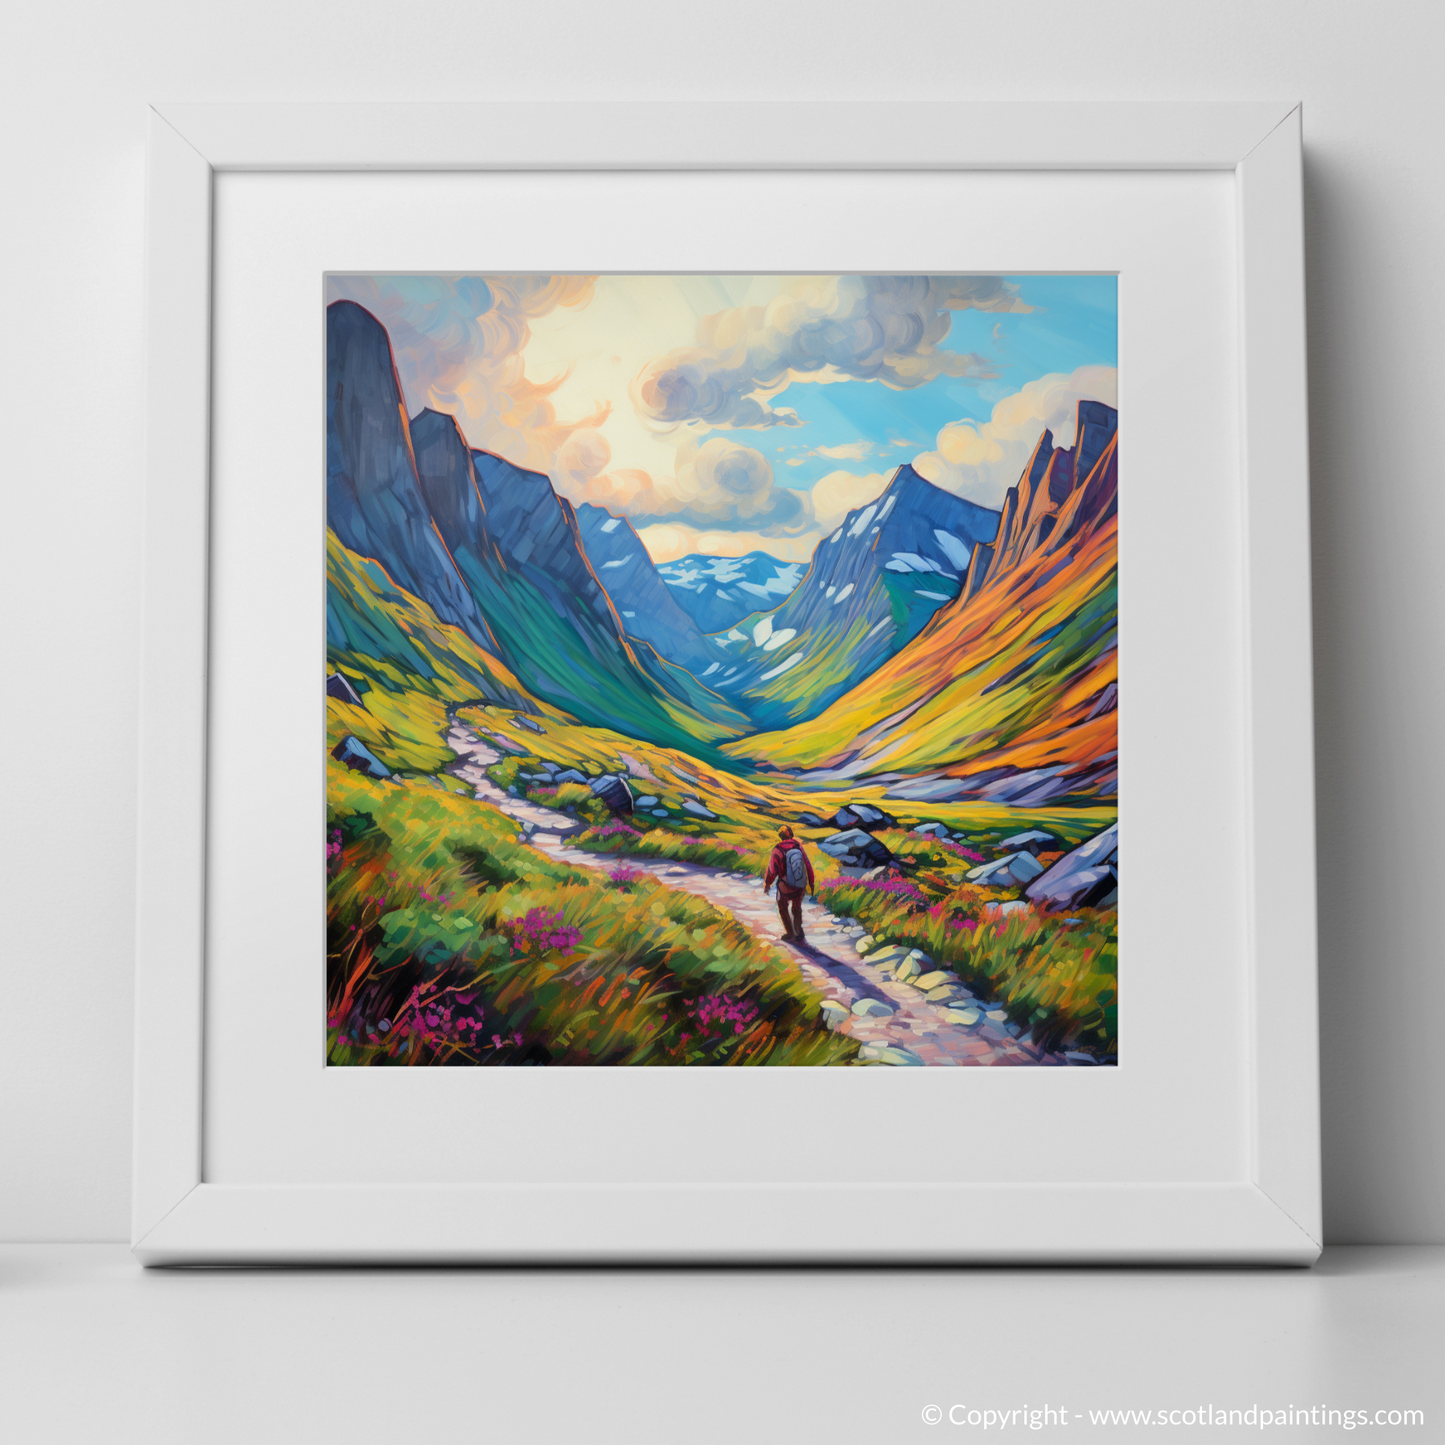 Painting and Art Print of Hikers in Glencoe. Highland Wanderer: An Impressionist Journey through Glencoe.